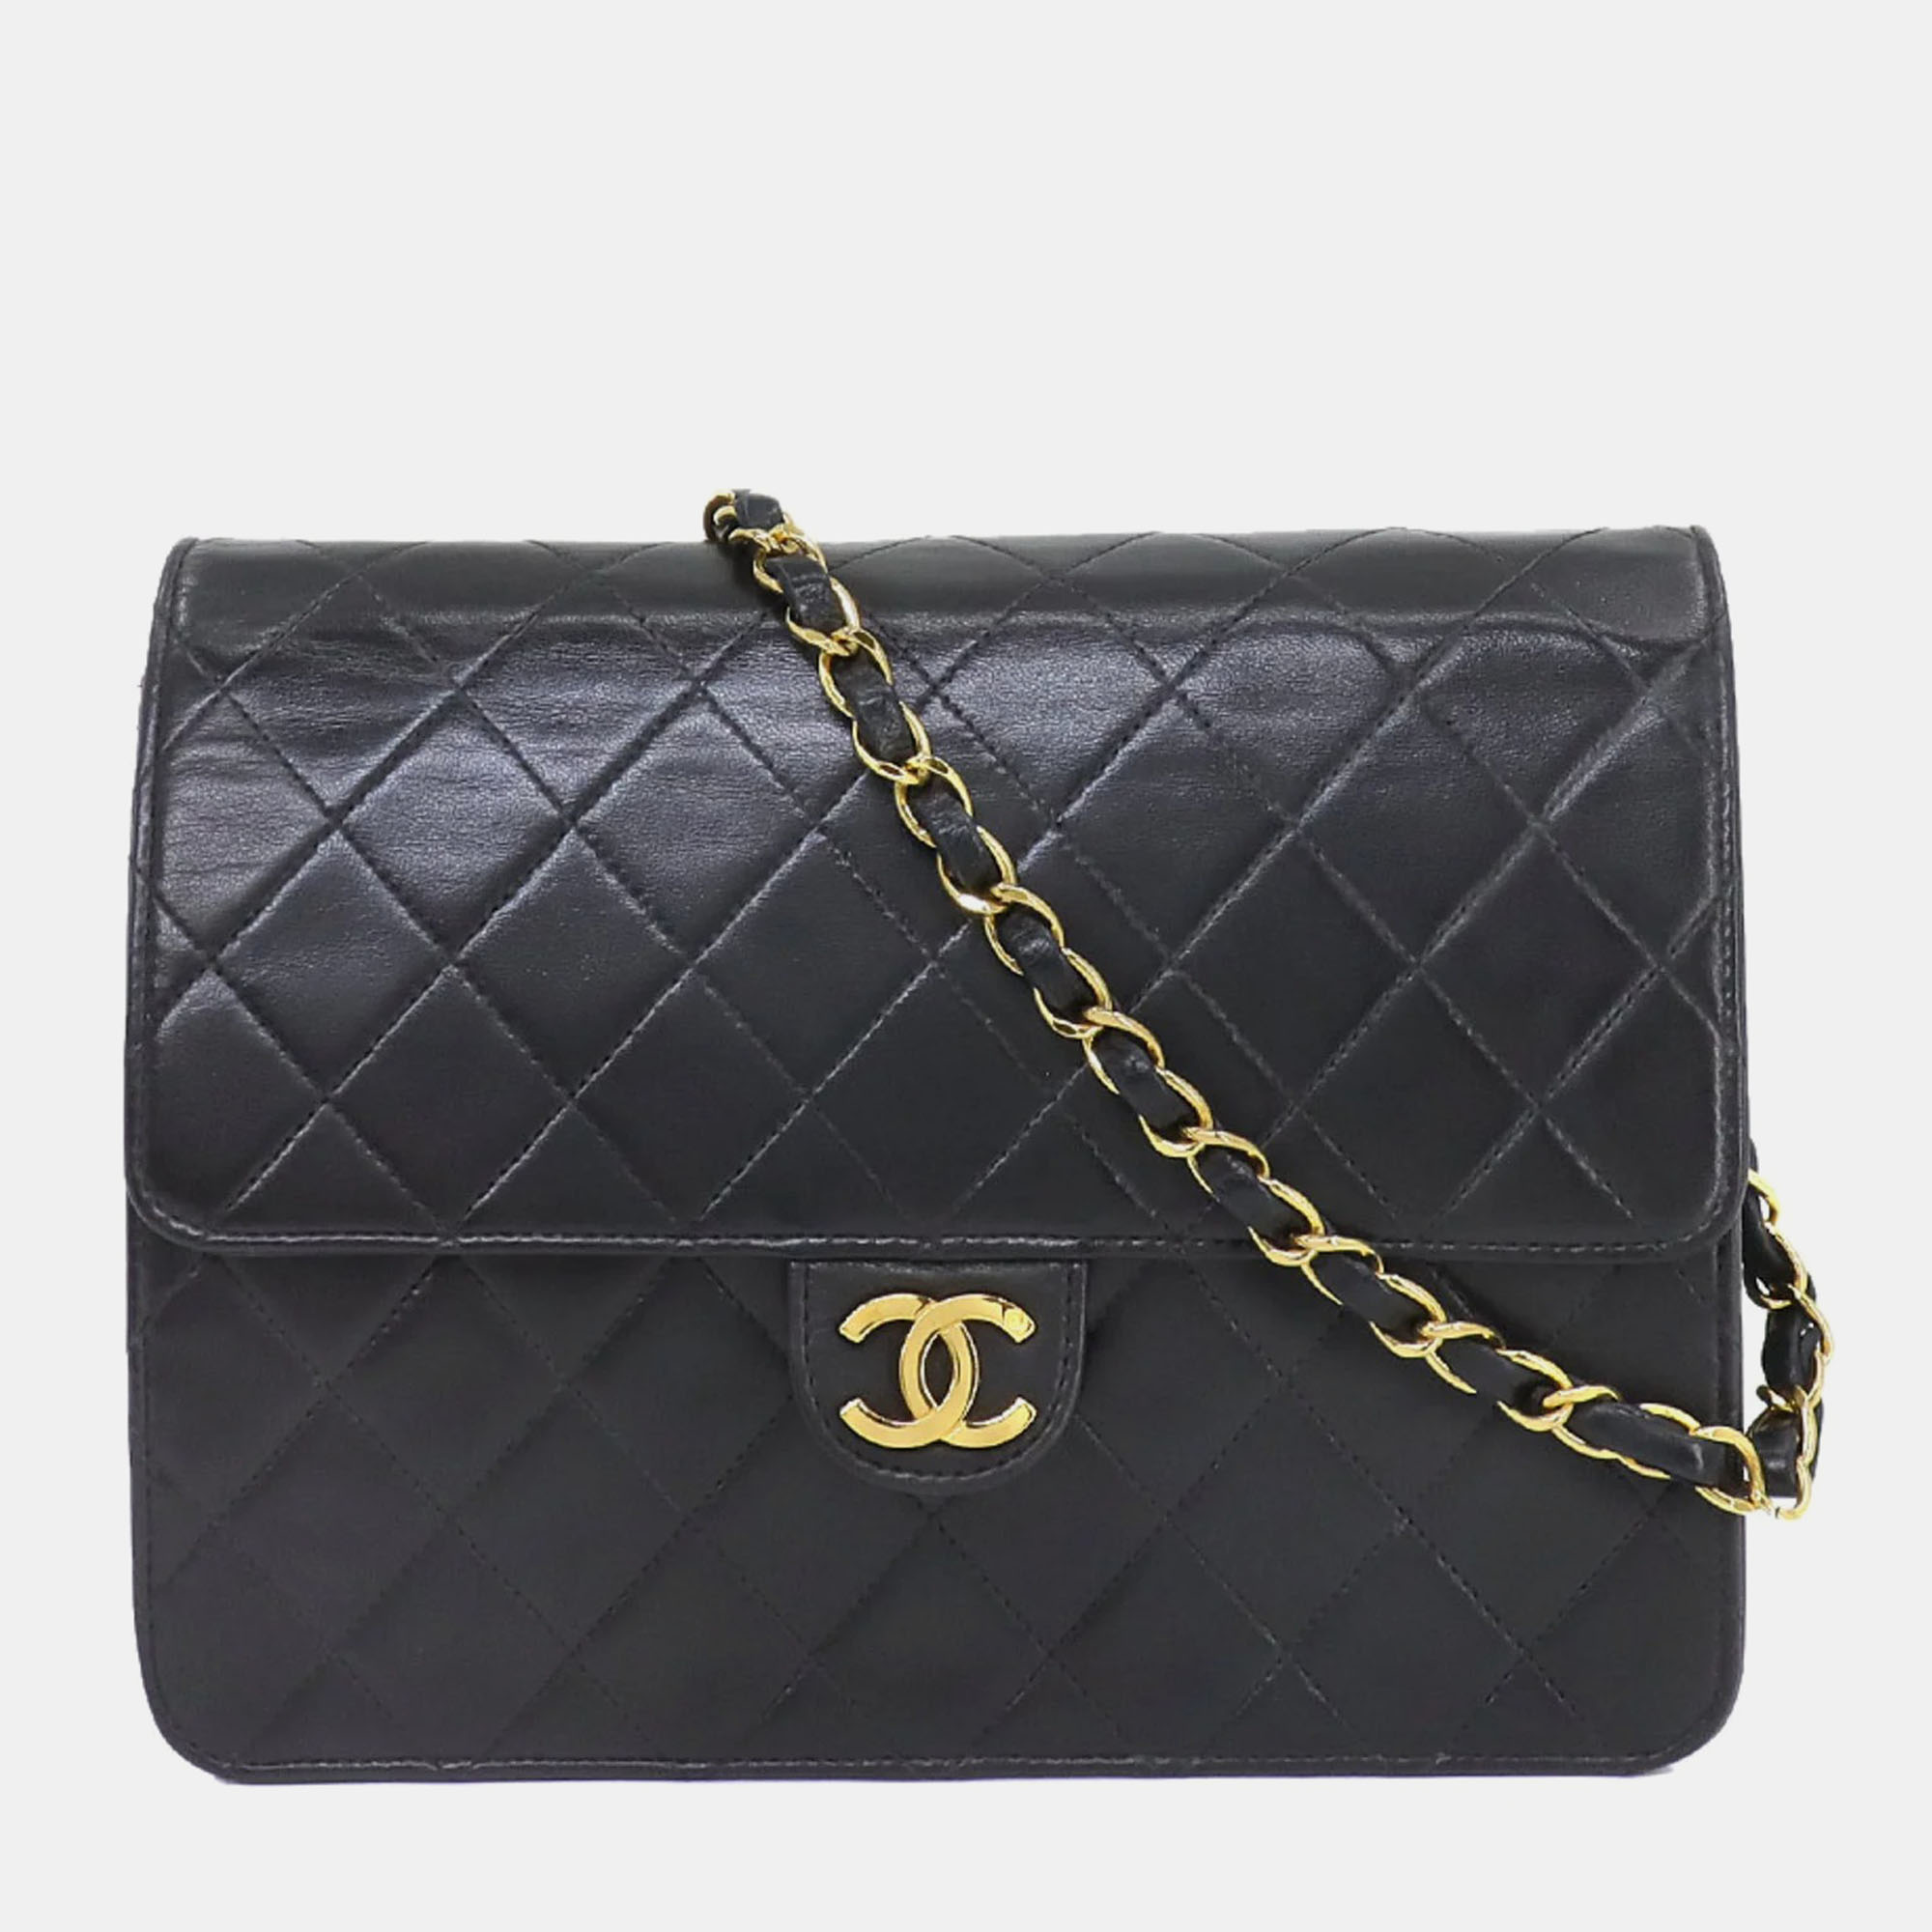 Chanel black lambskin leather small vintage chain flap bag